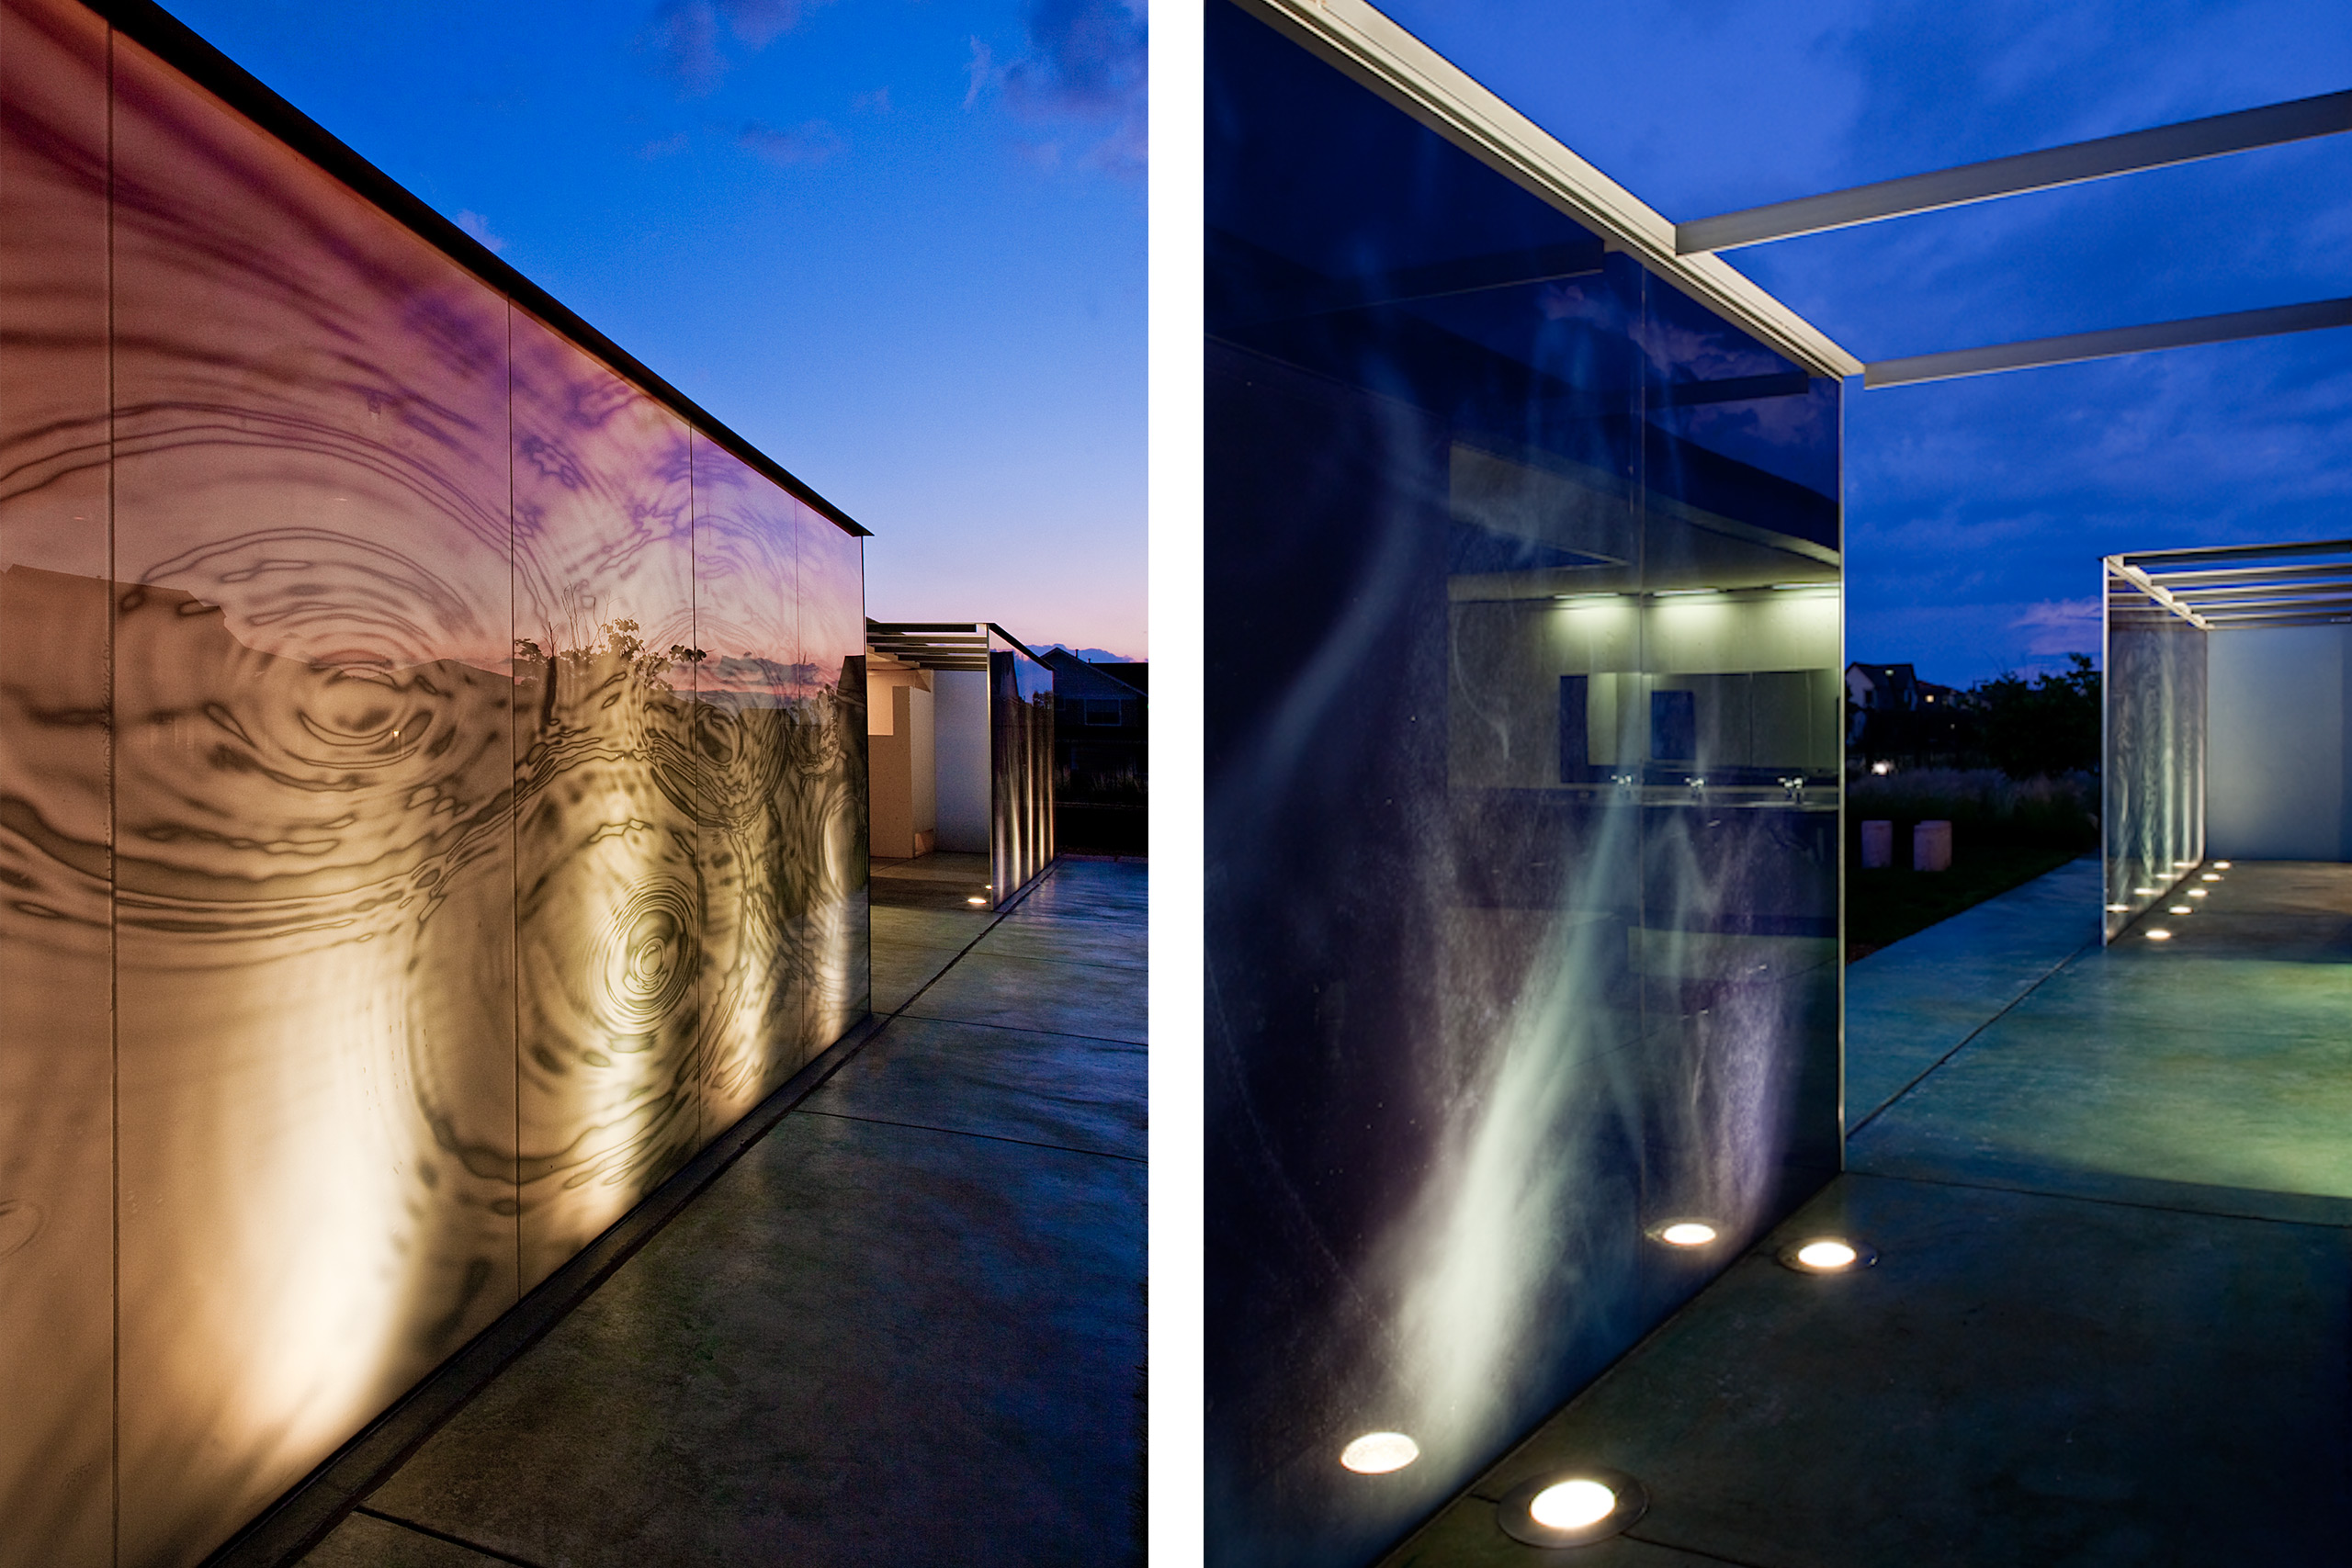 Poolhouse 3 by Semple Brown Design and Renée del Gaudio. Photographic panels by Urban Rock Design of Los Angeles. 